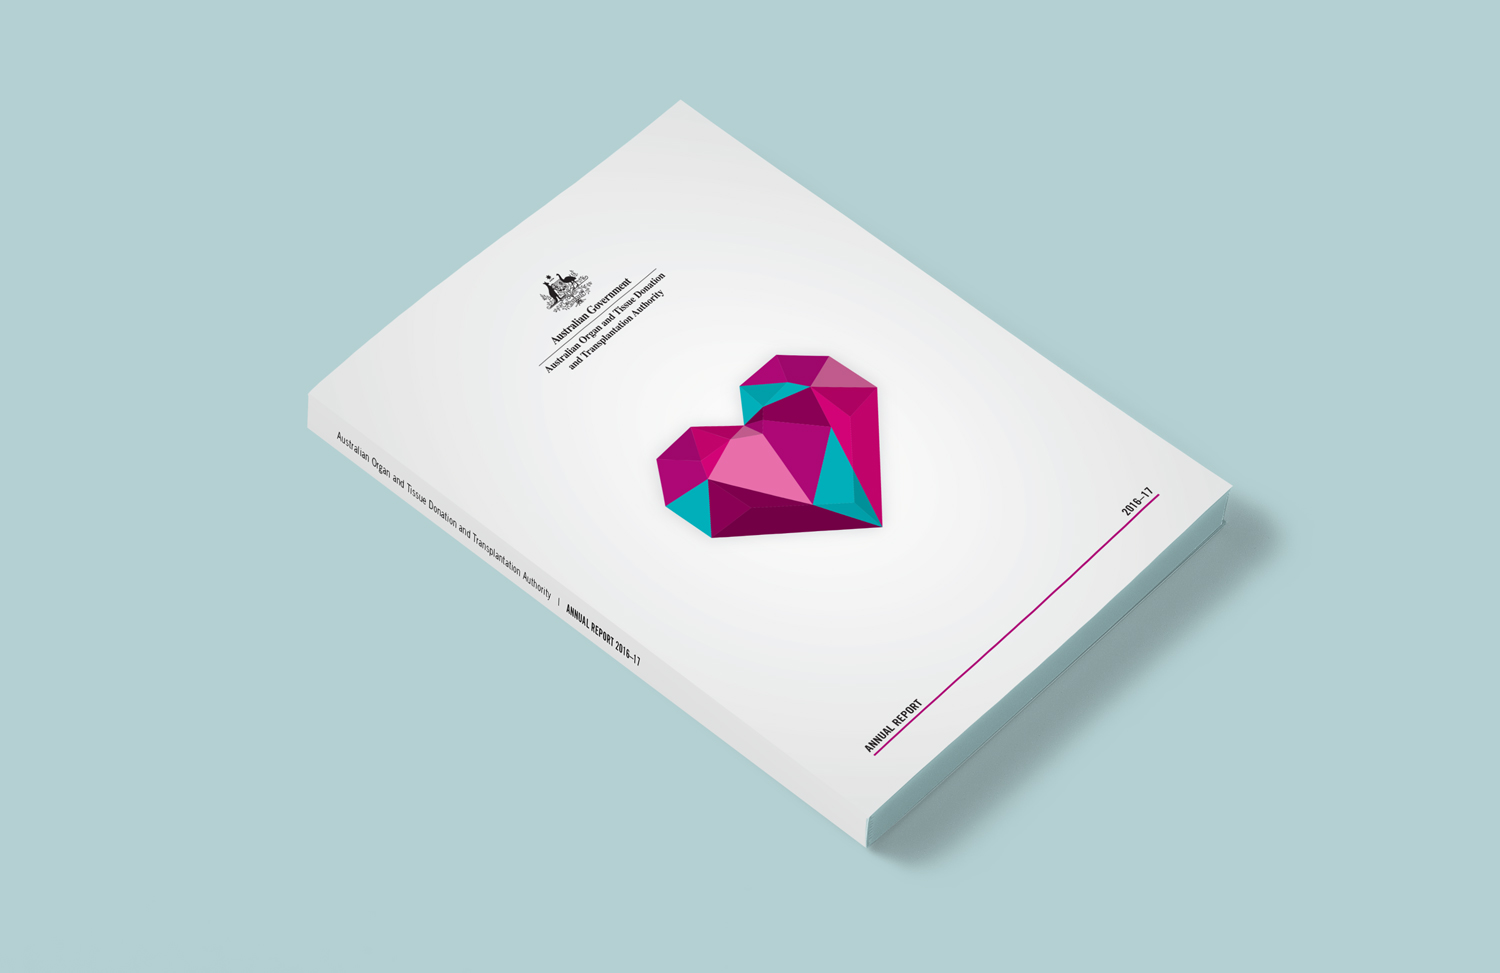 Organ & Tissue Association Annual Report cover design layout